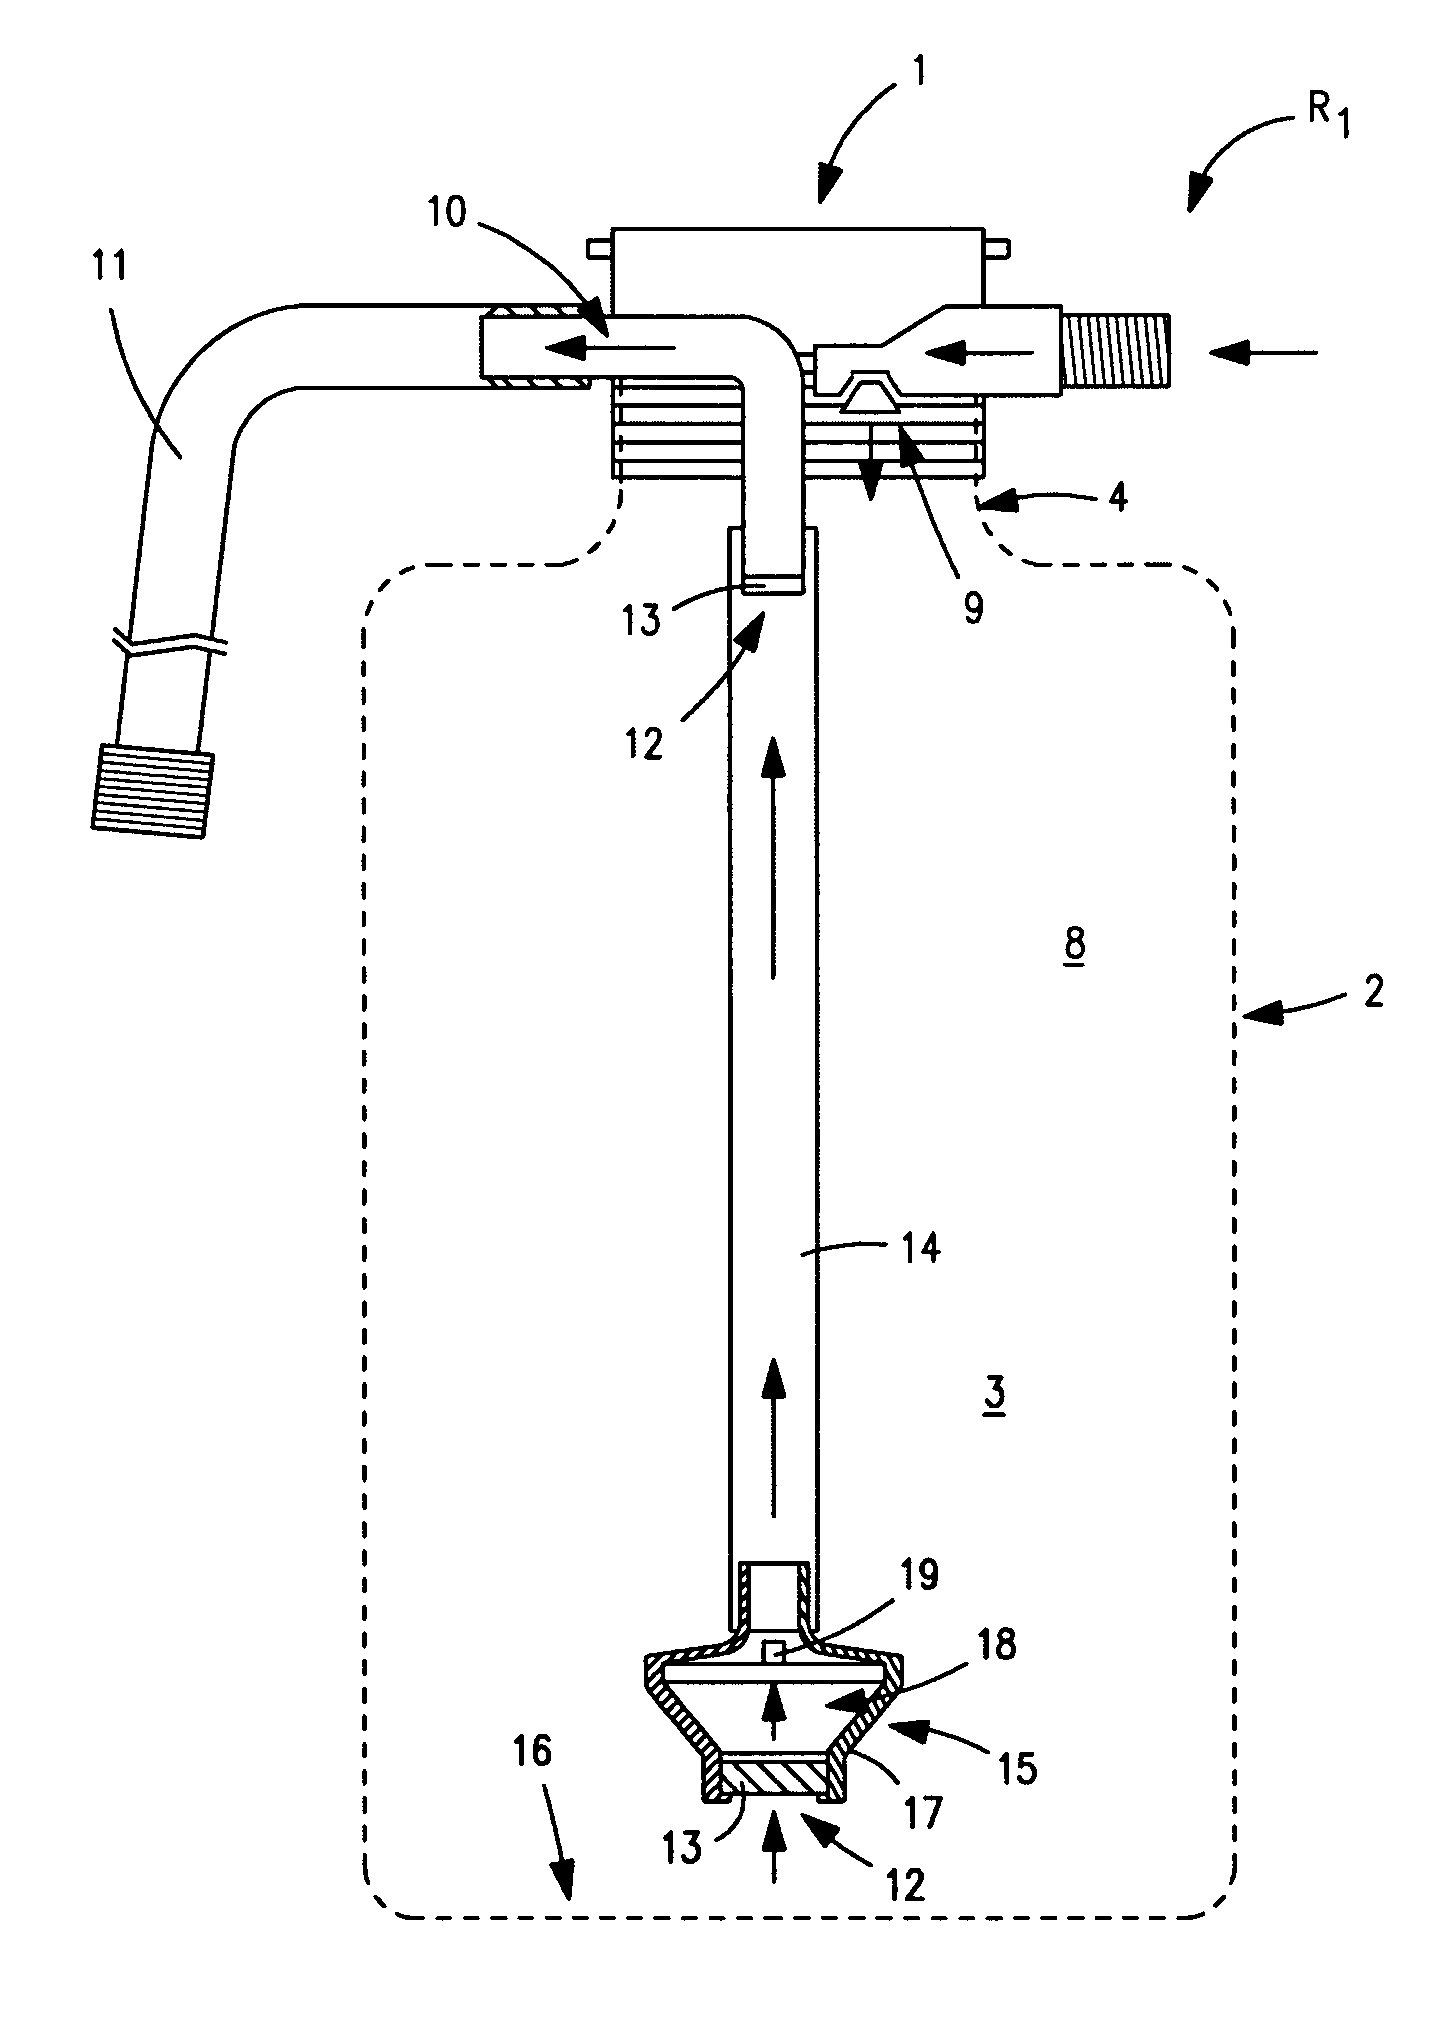 Device for discharging tire sealant from a container